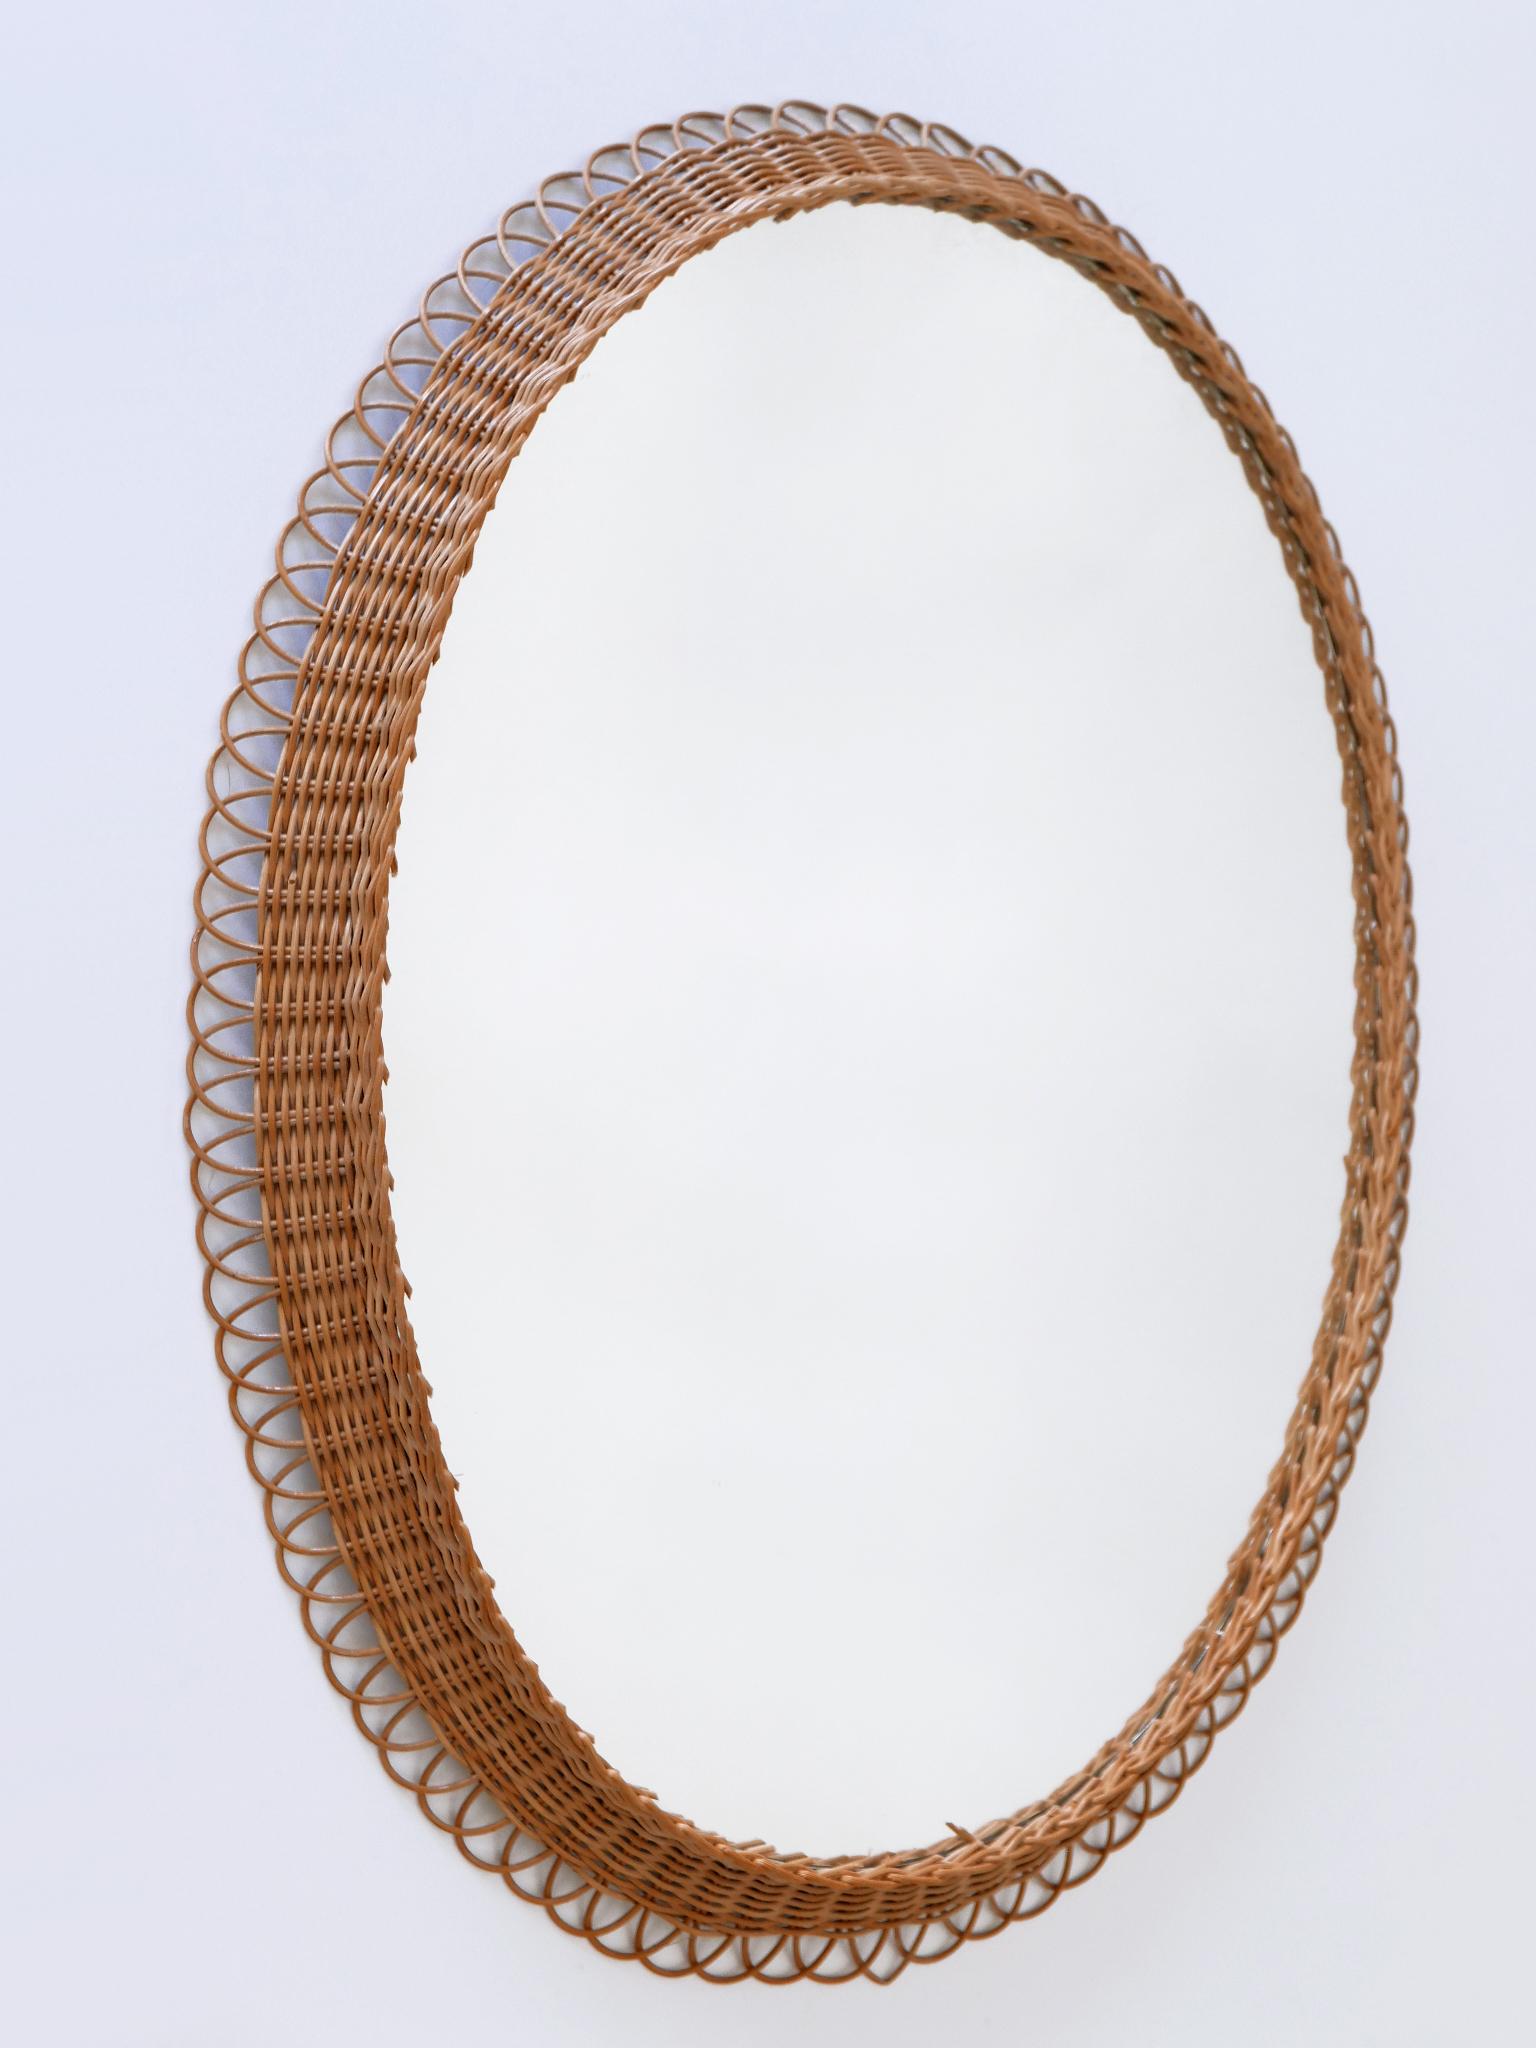 Highly decorative and rare Mid-Century Modern oval wall mirror. 
Manufactured in Germany, 1960s.

Executed in rattan and mirrored glass.

Condition:
Good original vintage condition. Wear consistent with use and age. 

Dimensions with frame:
H 23.23